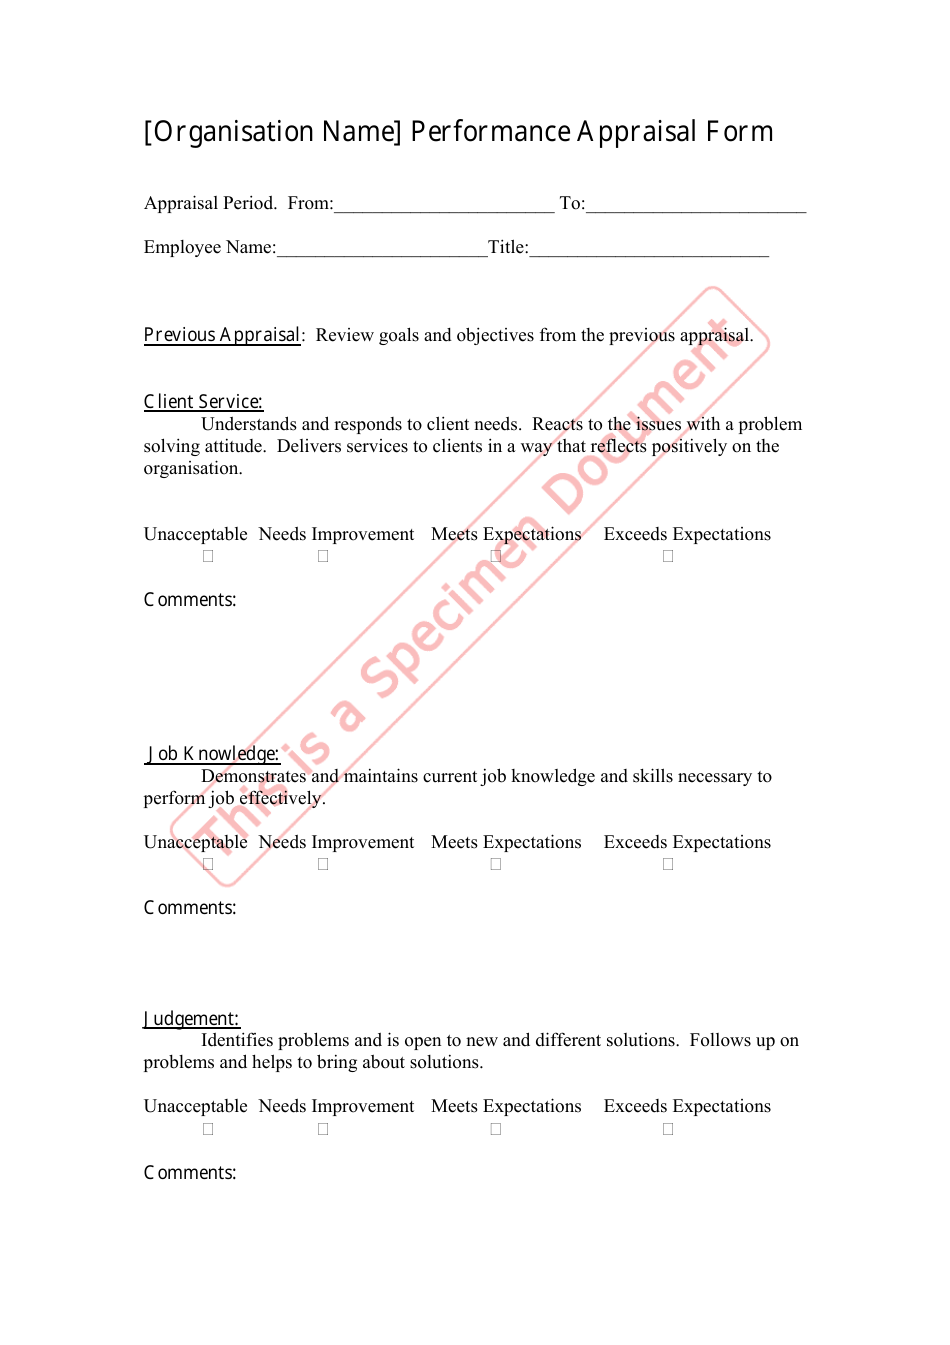 Sample Performance Appraisal Form, Page 1